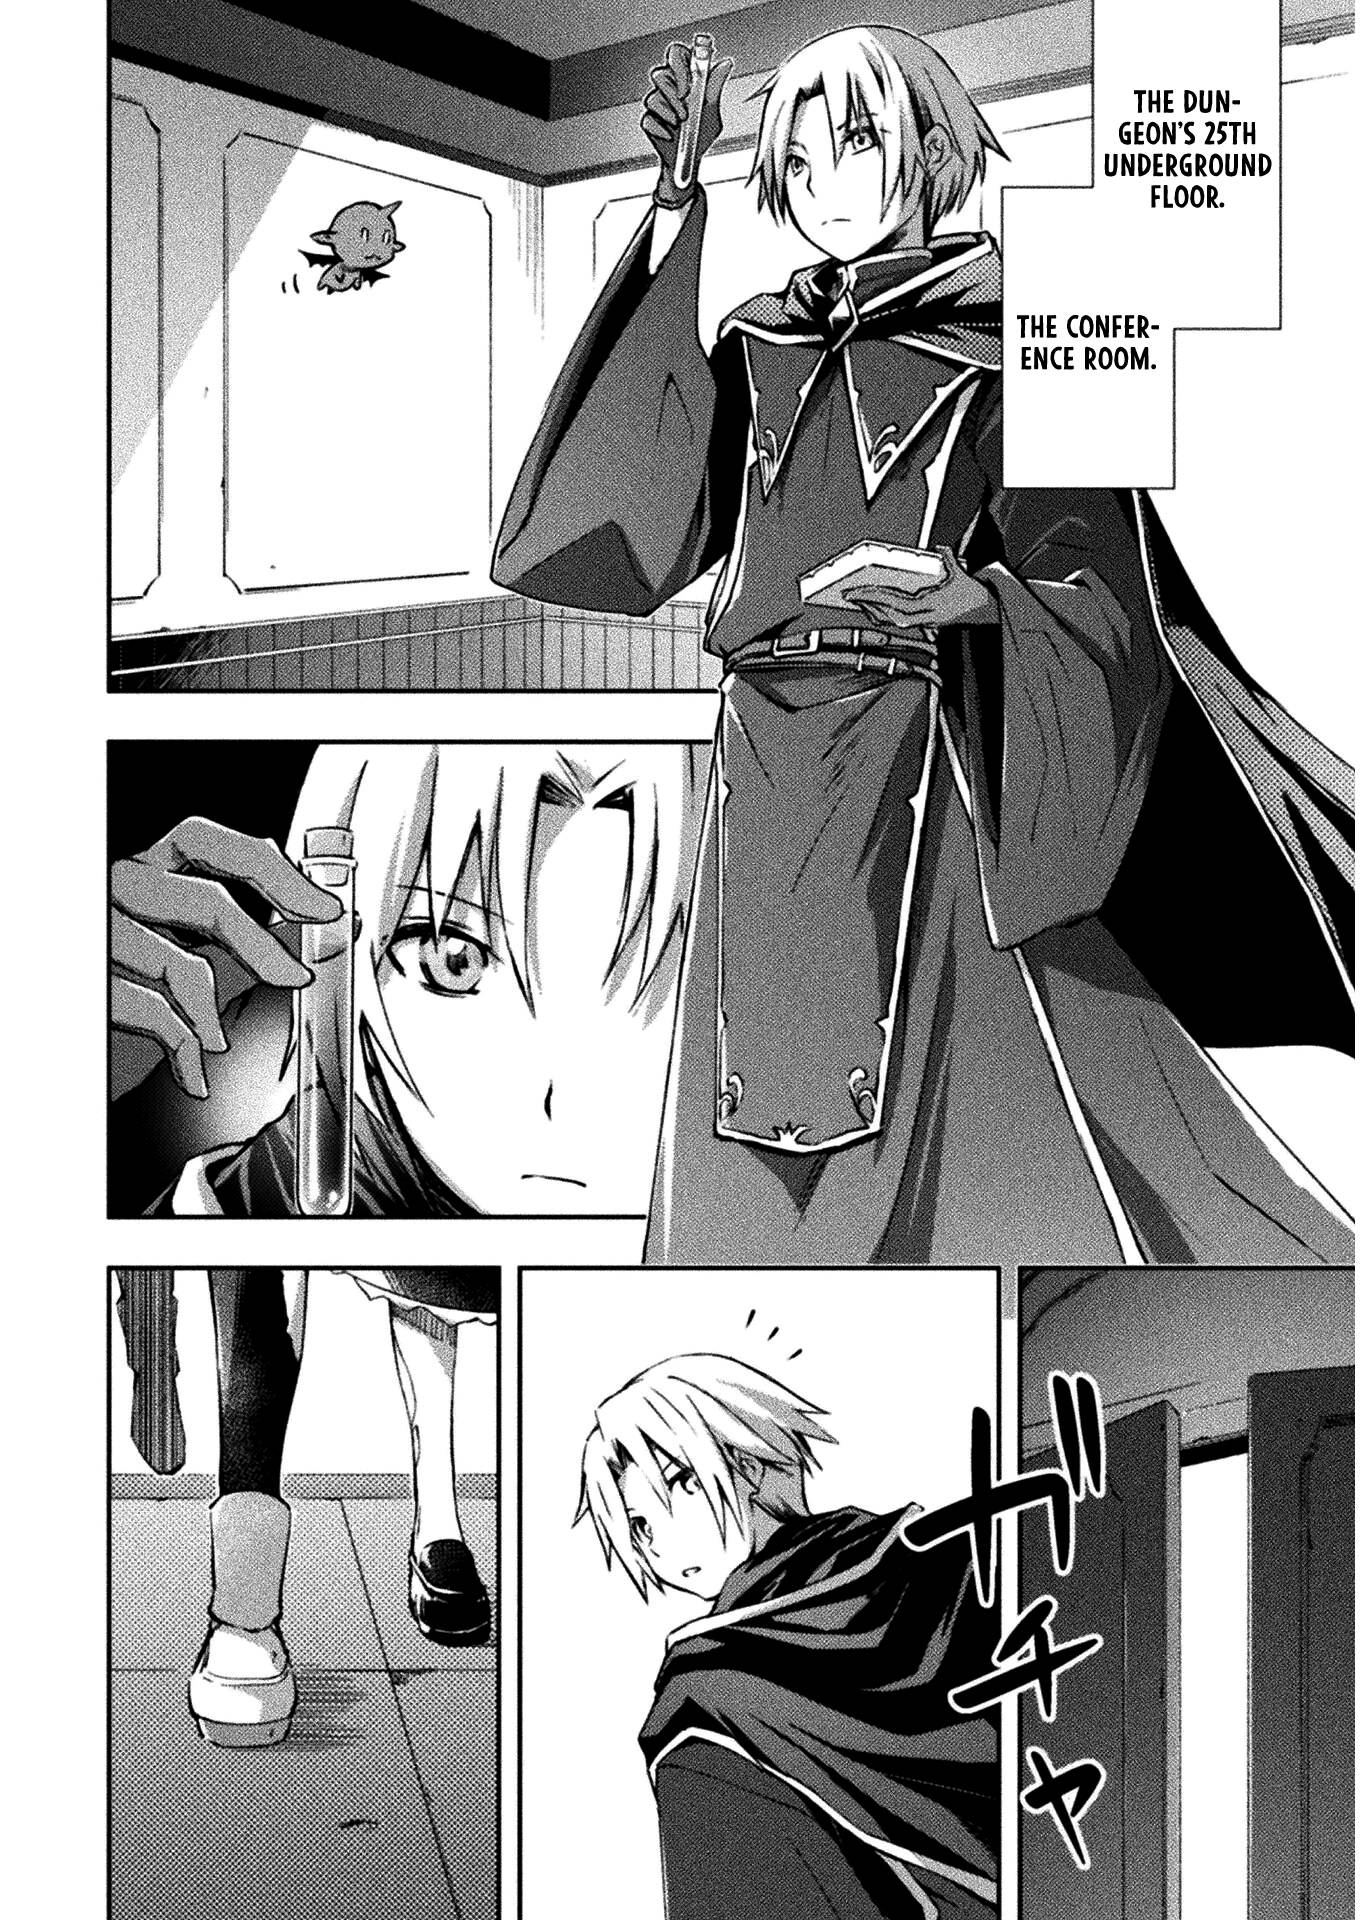 A Former Brave Resident in the Dungeon - chapter 33 - #3